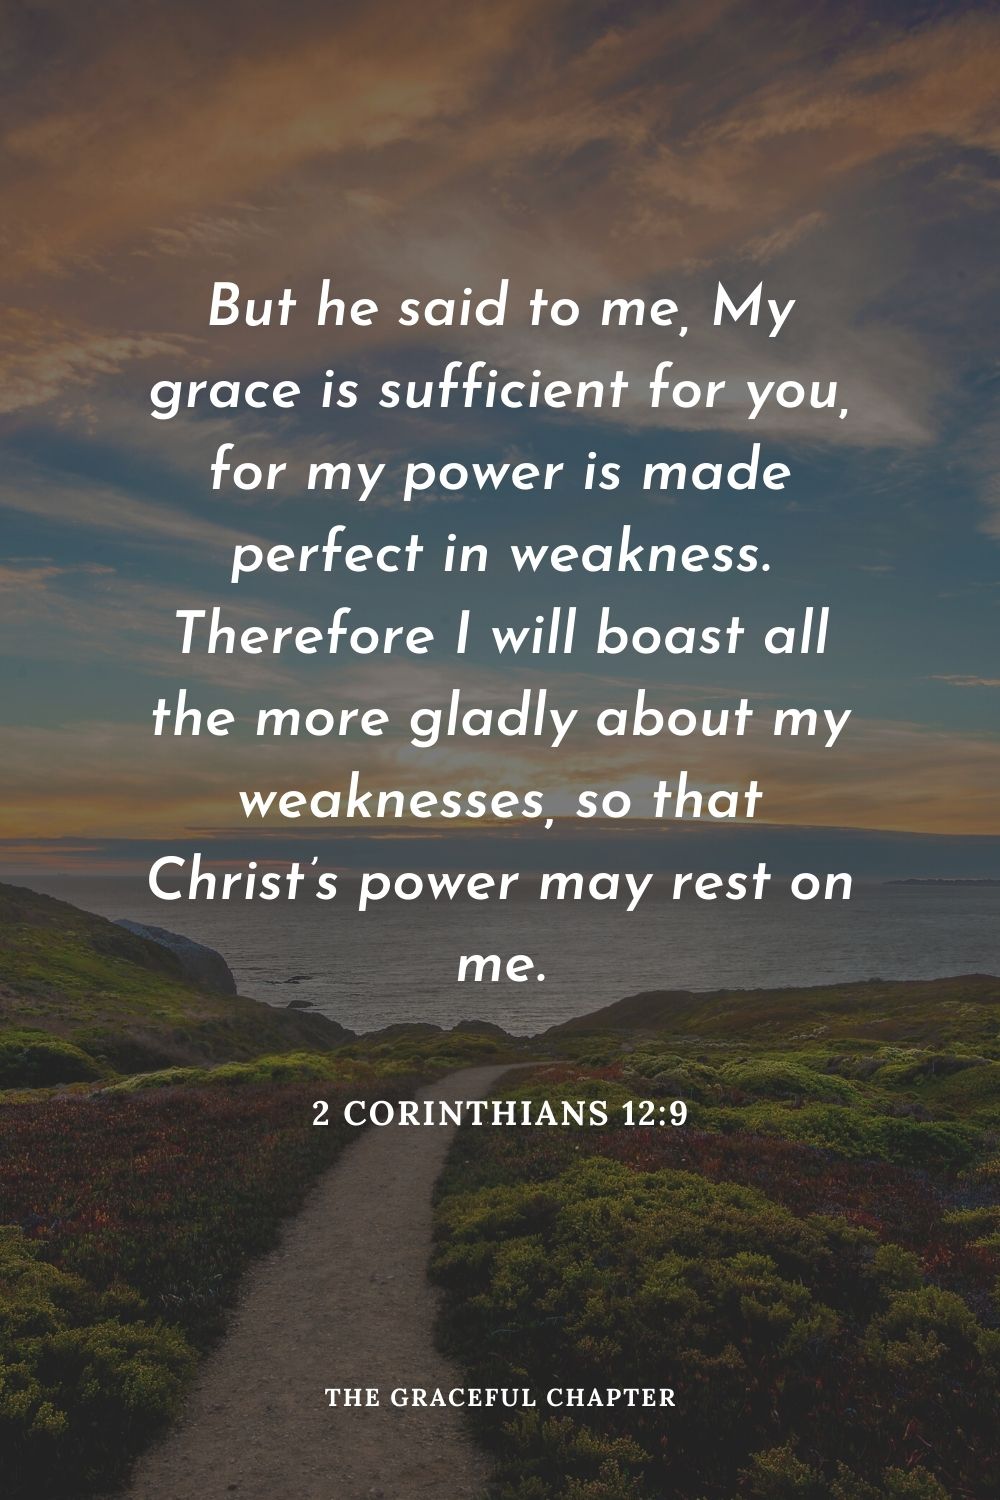 But he said to me, My grace is sufficient for you, for my power is made perfect in weakness. Therefore I will boast all the more gladly about my weaknesses, so that Christ’s power may rest on me.